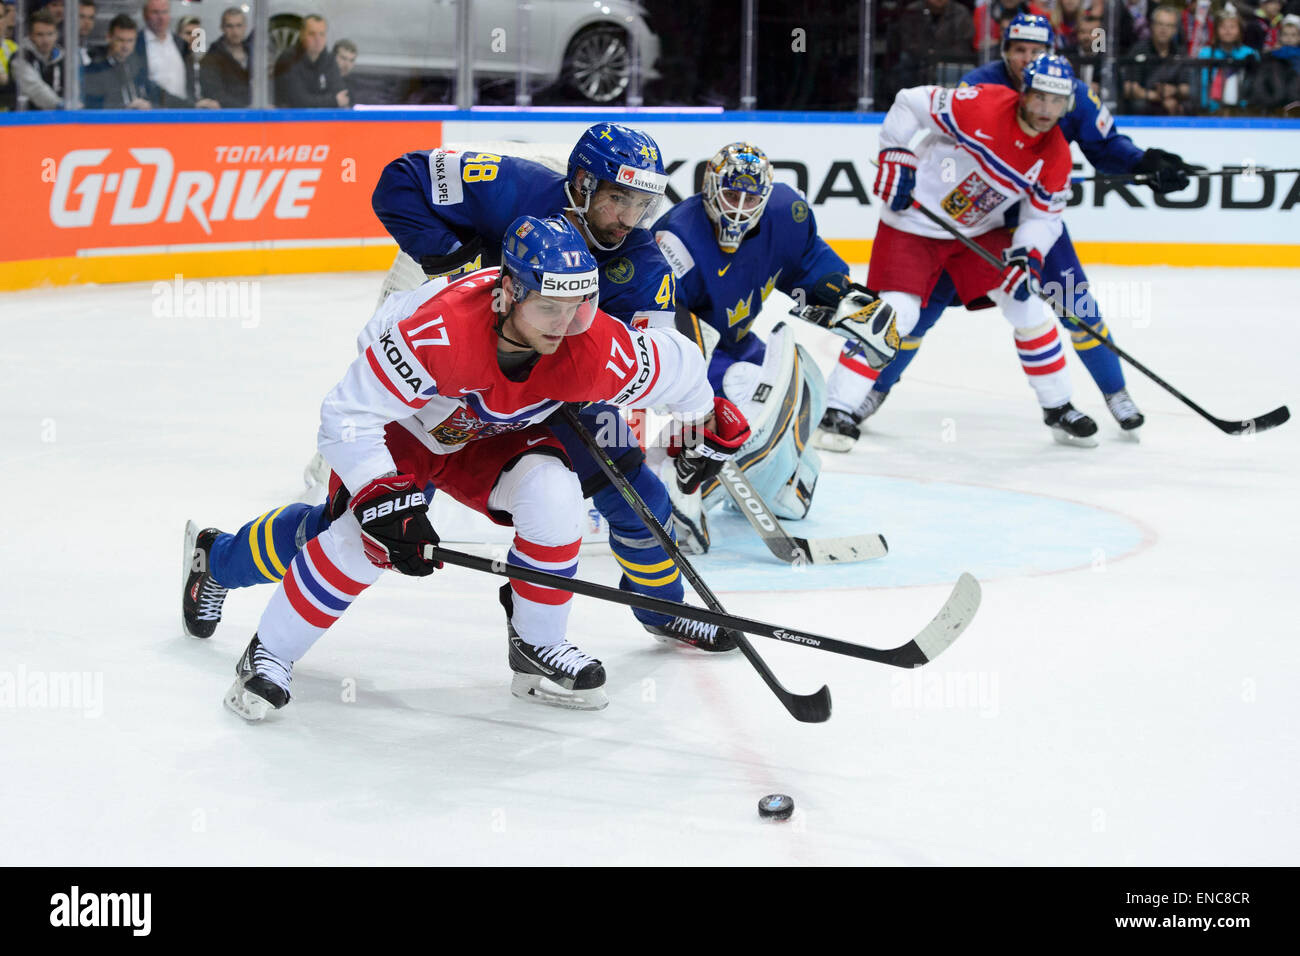 From left: Vladimir Sobotka of Czech Republic, Daniel Rahimi of Sweden, Sweden's goalkeeper Jhonas Enroth and Jaromir Jagr of Czech Republic in action during the Ice Hockey World Championship Group A match Czech Republic vs Sweden in Prague, Czech Republic, May 1, 2015. (CTK Photo/Michal Kamaryt) Stock Photo